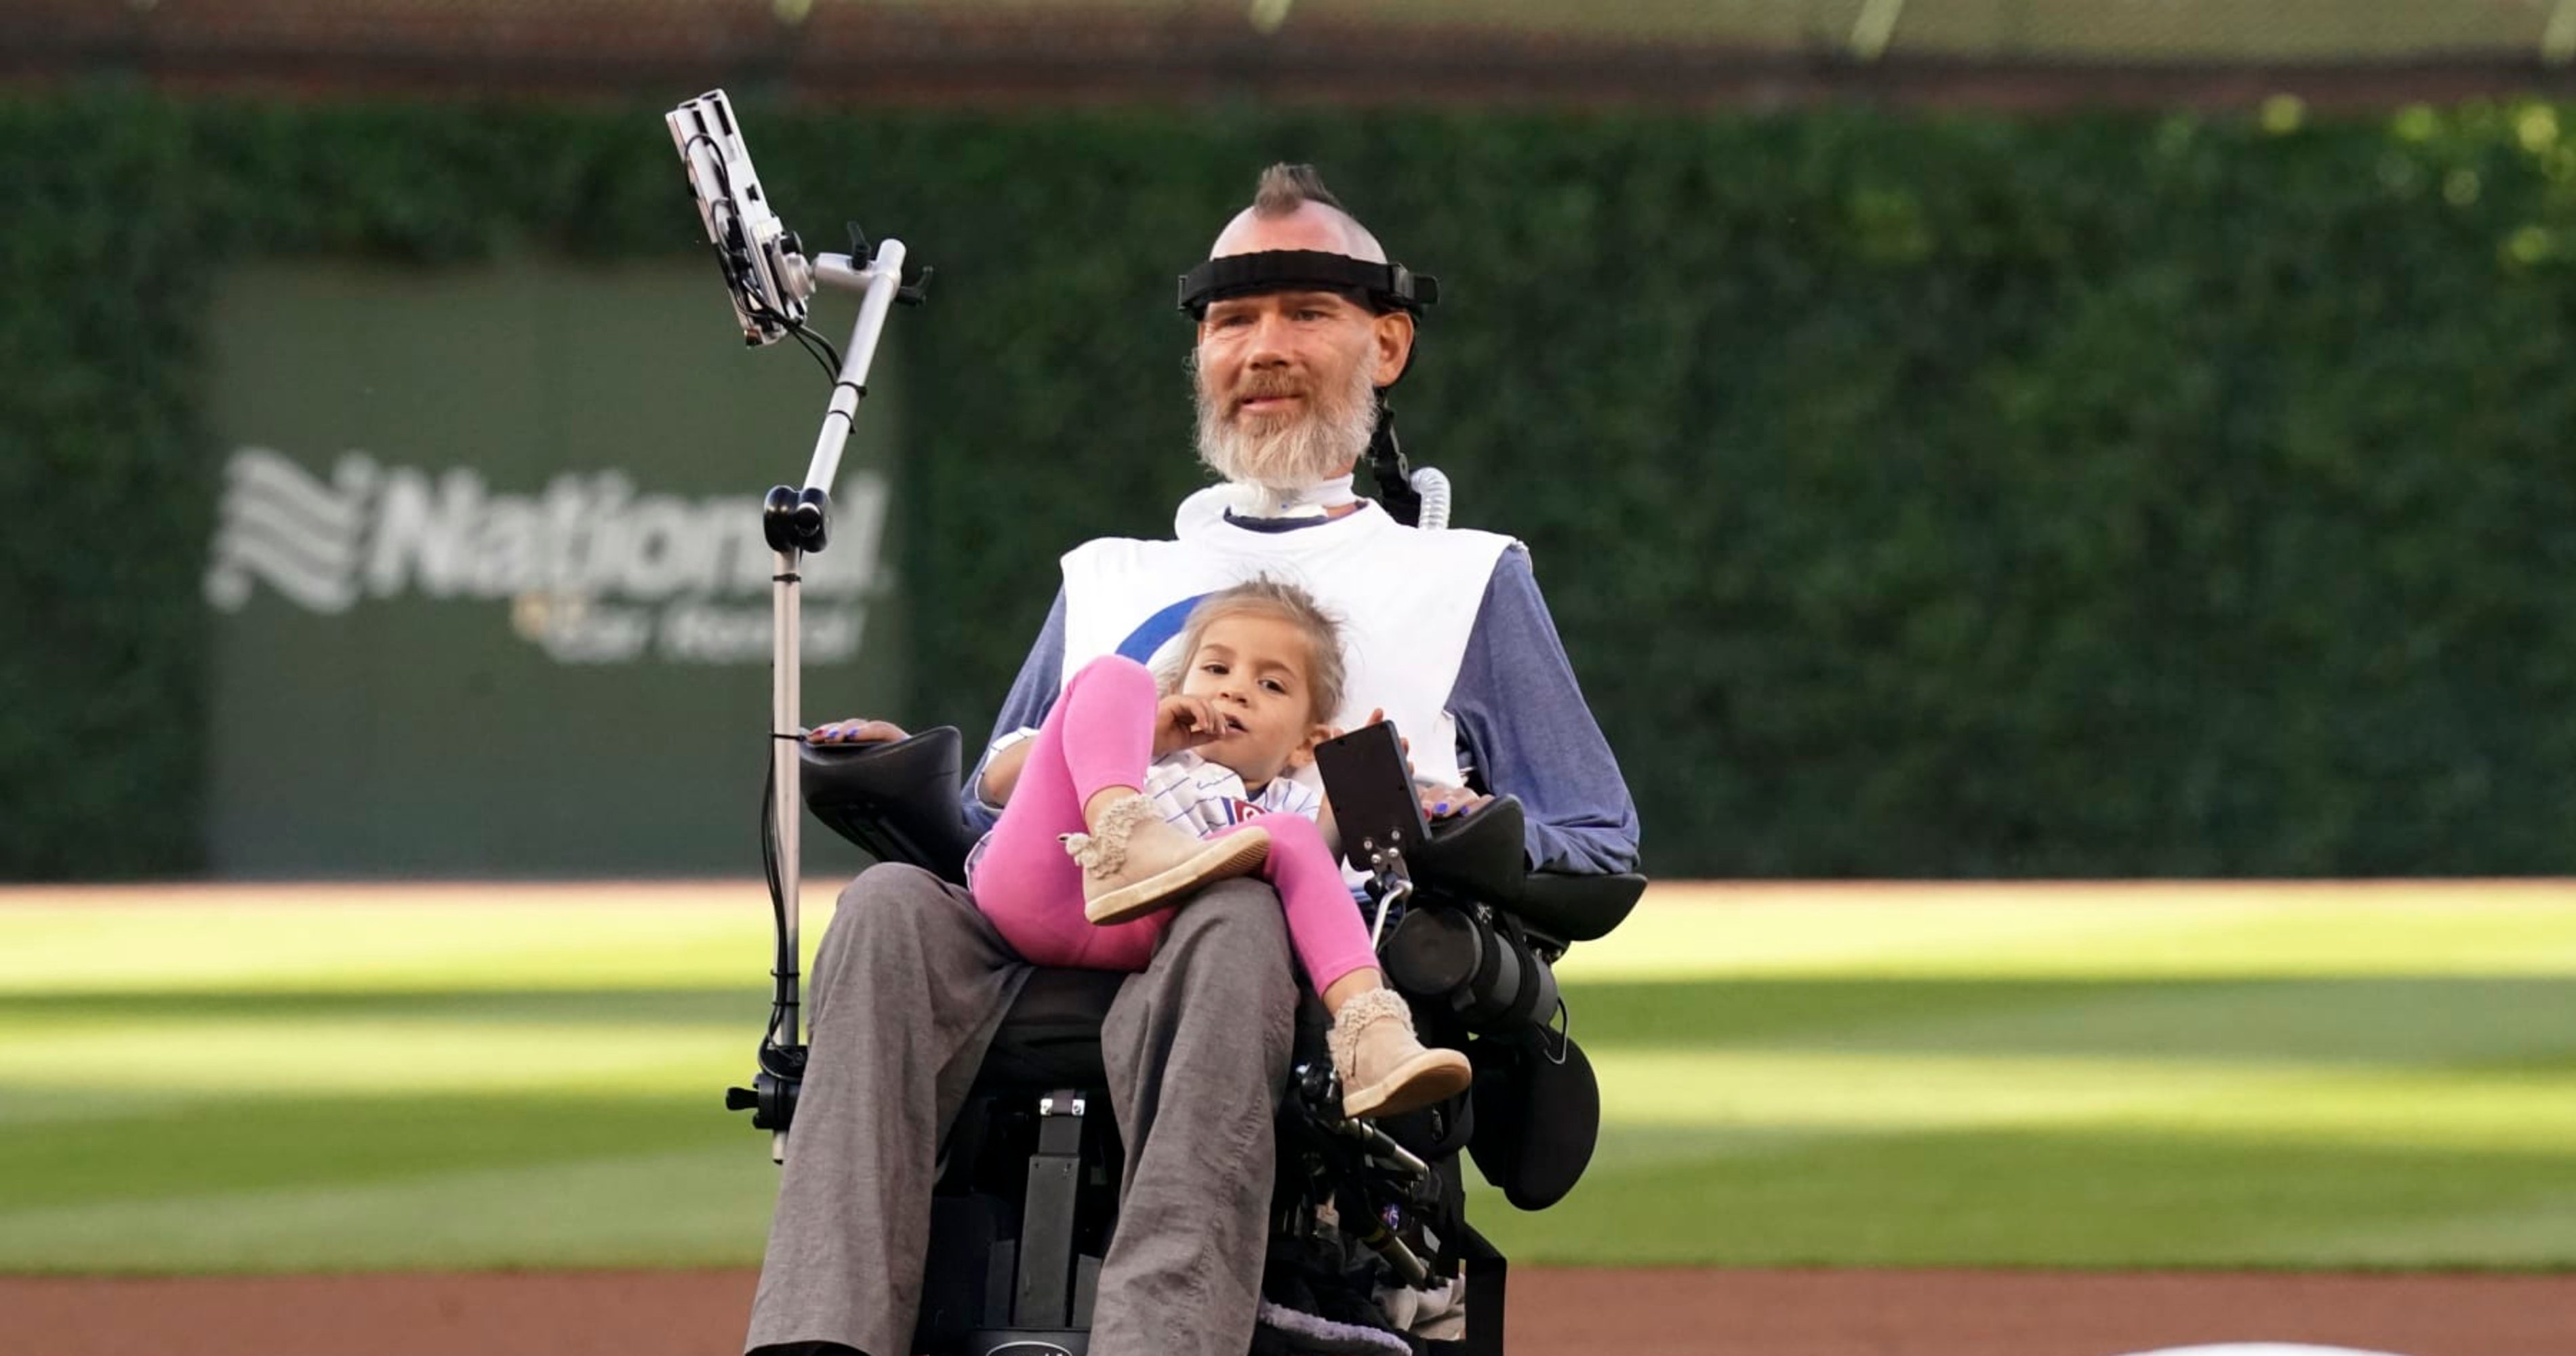 Steve Gleason, Dawn Staley and Prince Harry to be Honored at 2024 ESPYs Awards